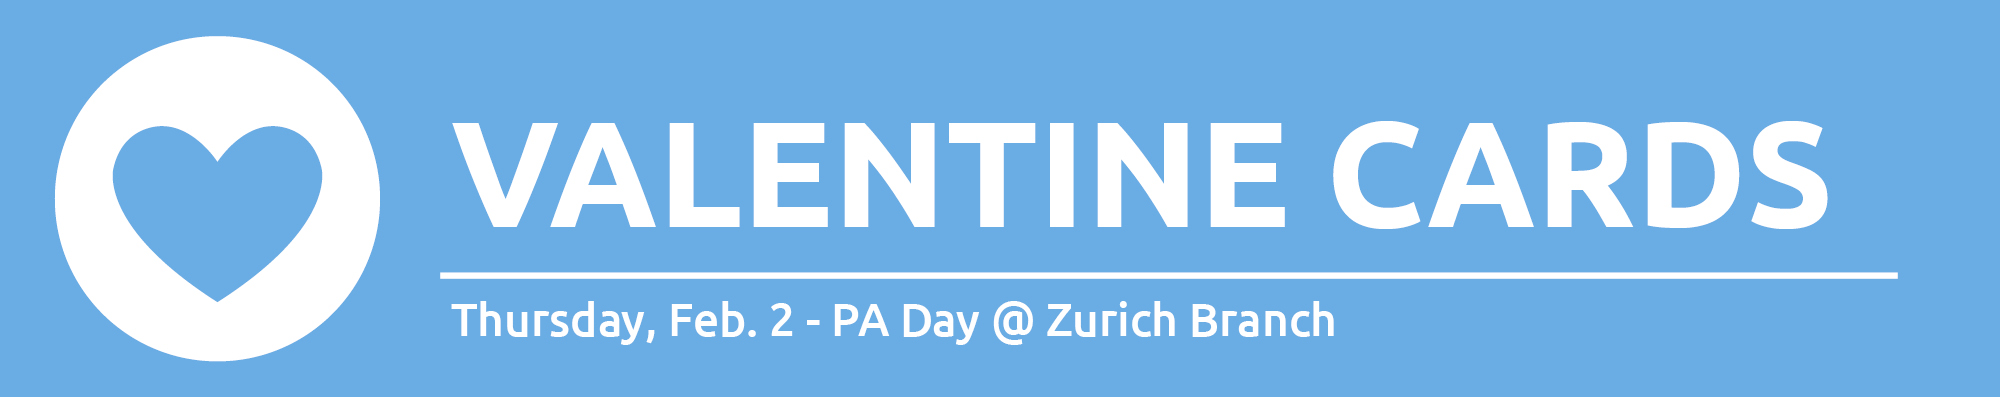 Illustration of a heart with text promoting PA Day Valentine Card making at Zurich Branch